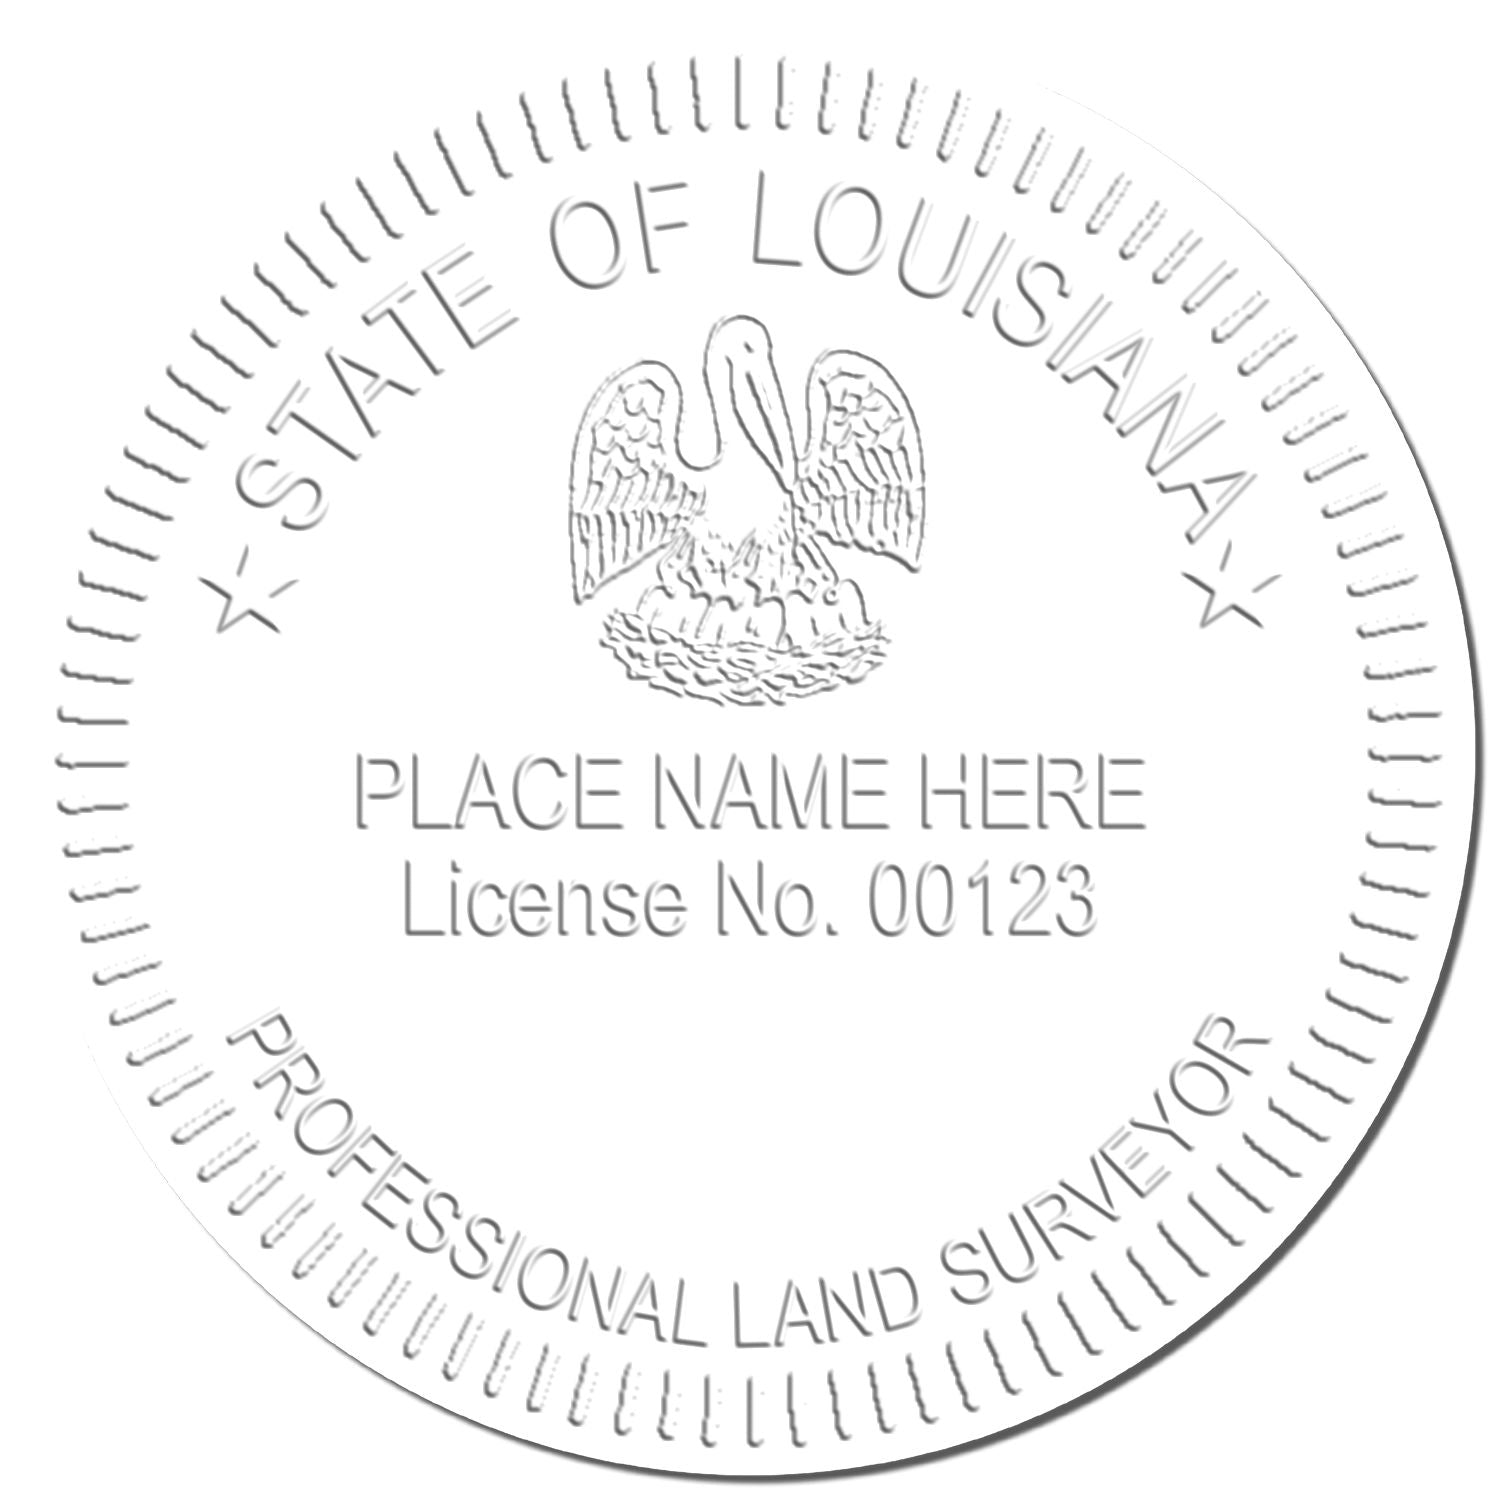 The main image for the Long Reach Louisiana Land Surveyor Seal depicting a sample of the imprint and electronic files